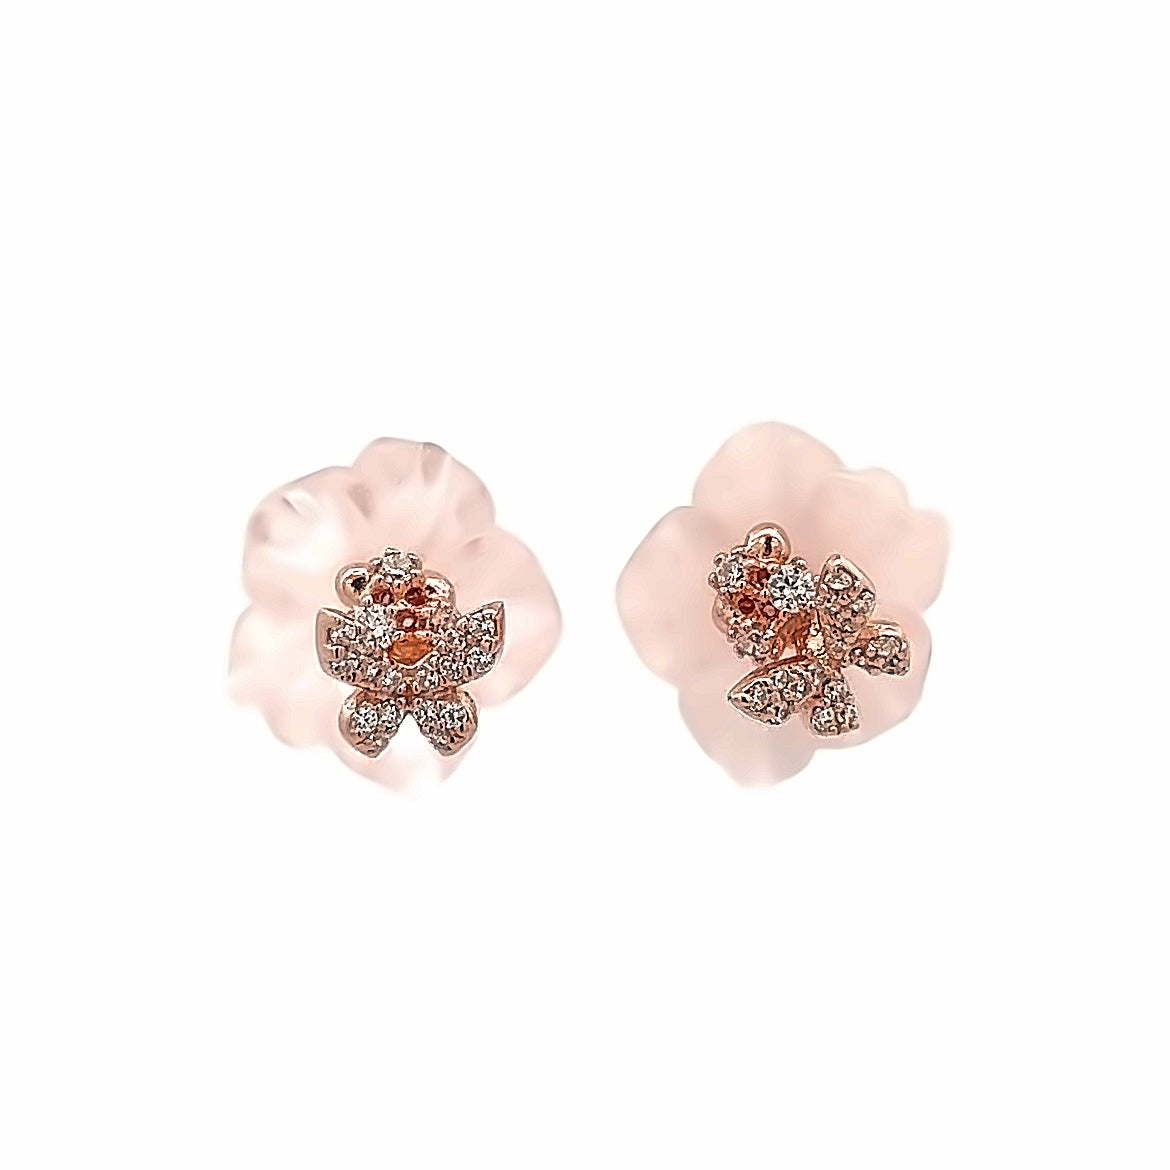 925 SILVER PLATED EARRINGS WITH CENTER ROSE QUARTZ